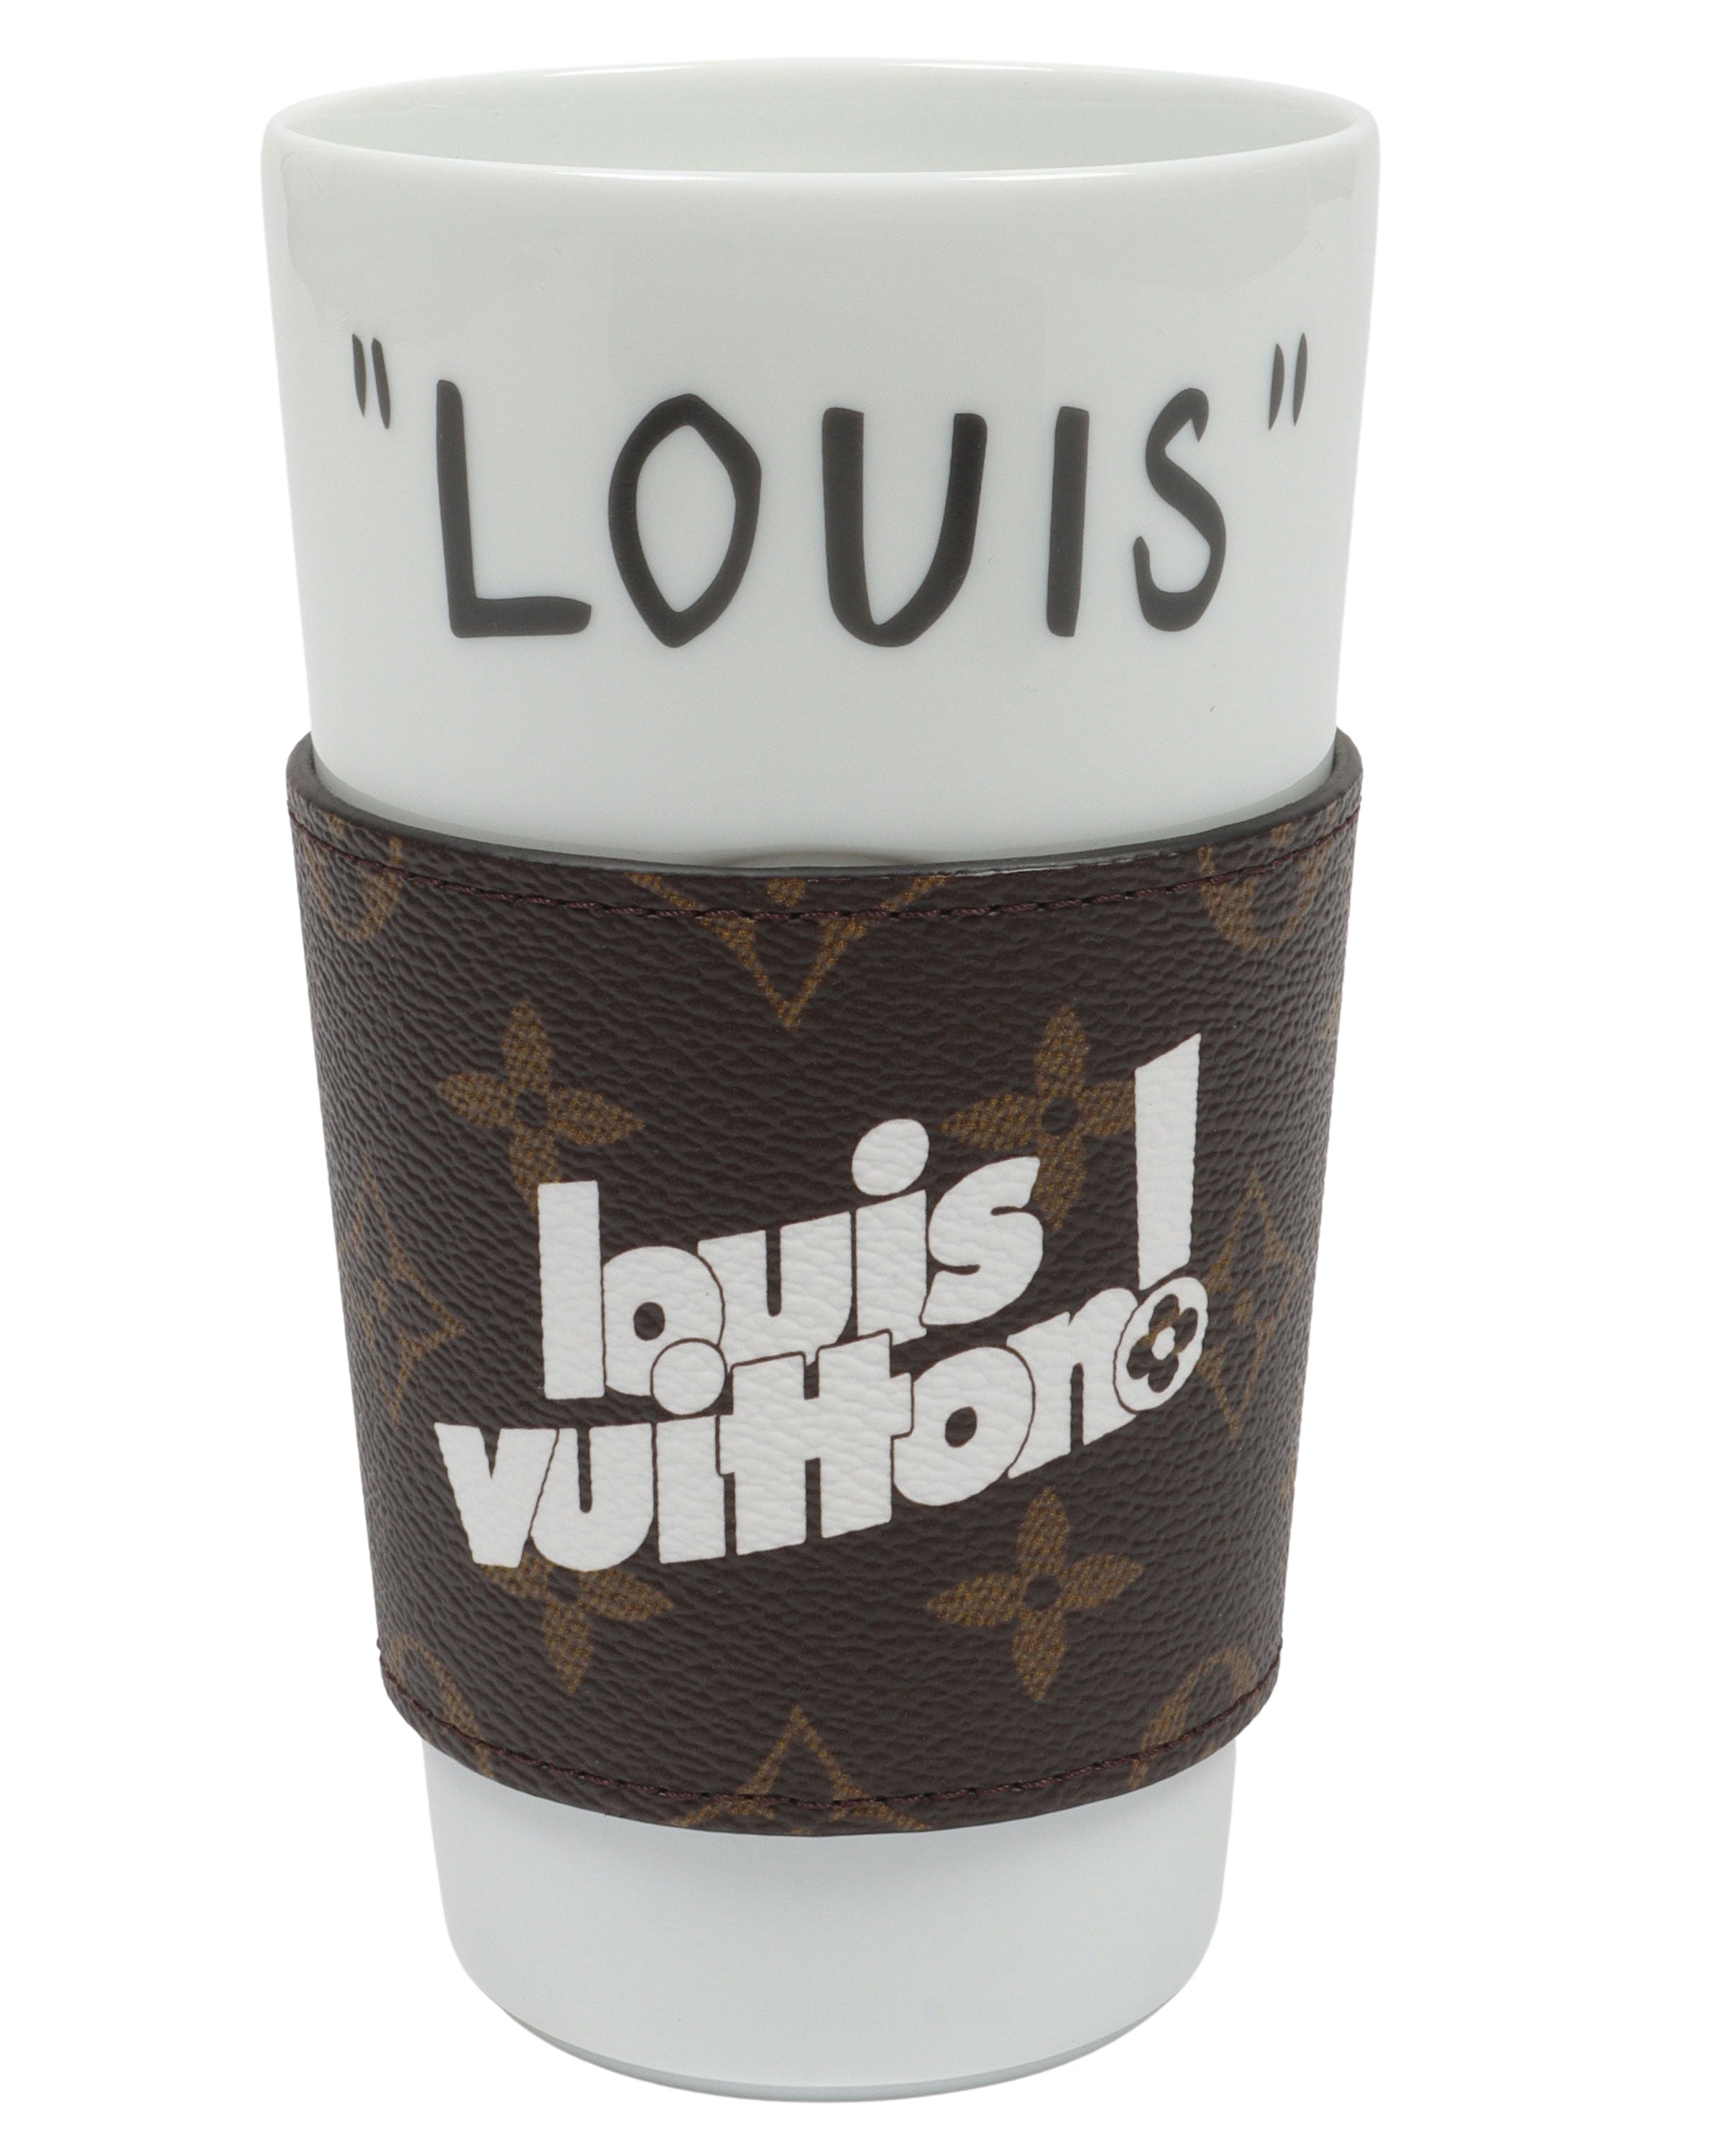 Louis Vuitton Coffee Cup Bag ☕️ 💫 Pickup Available In Miami 💫 Shipping  available visit www.EvaDollHouse.com 💫 Like Our Page For The Latest  Updates, By Eva's Doll House